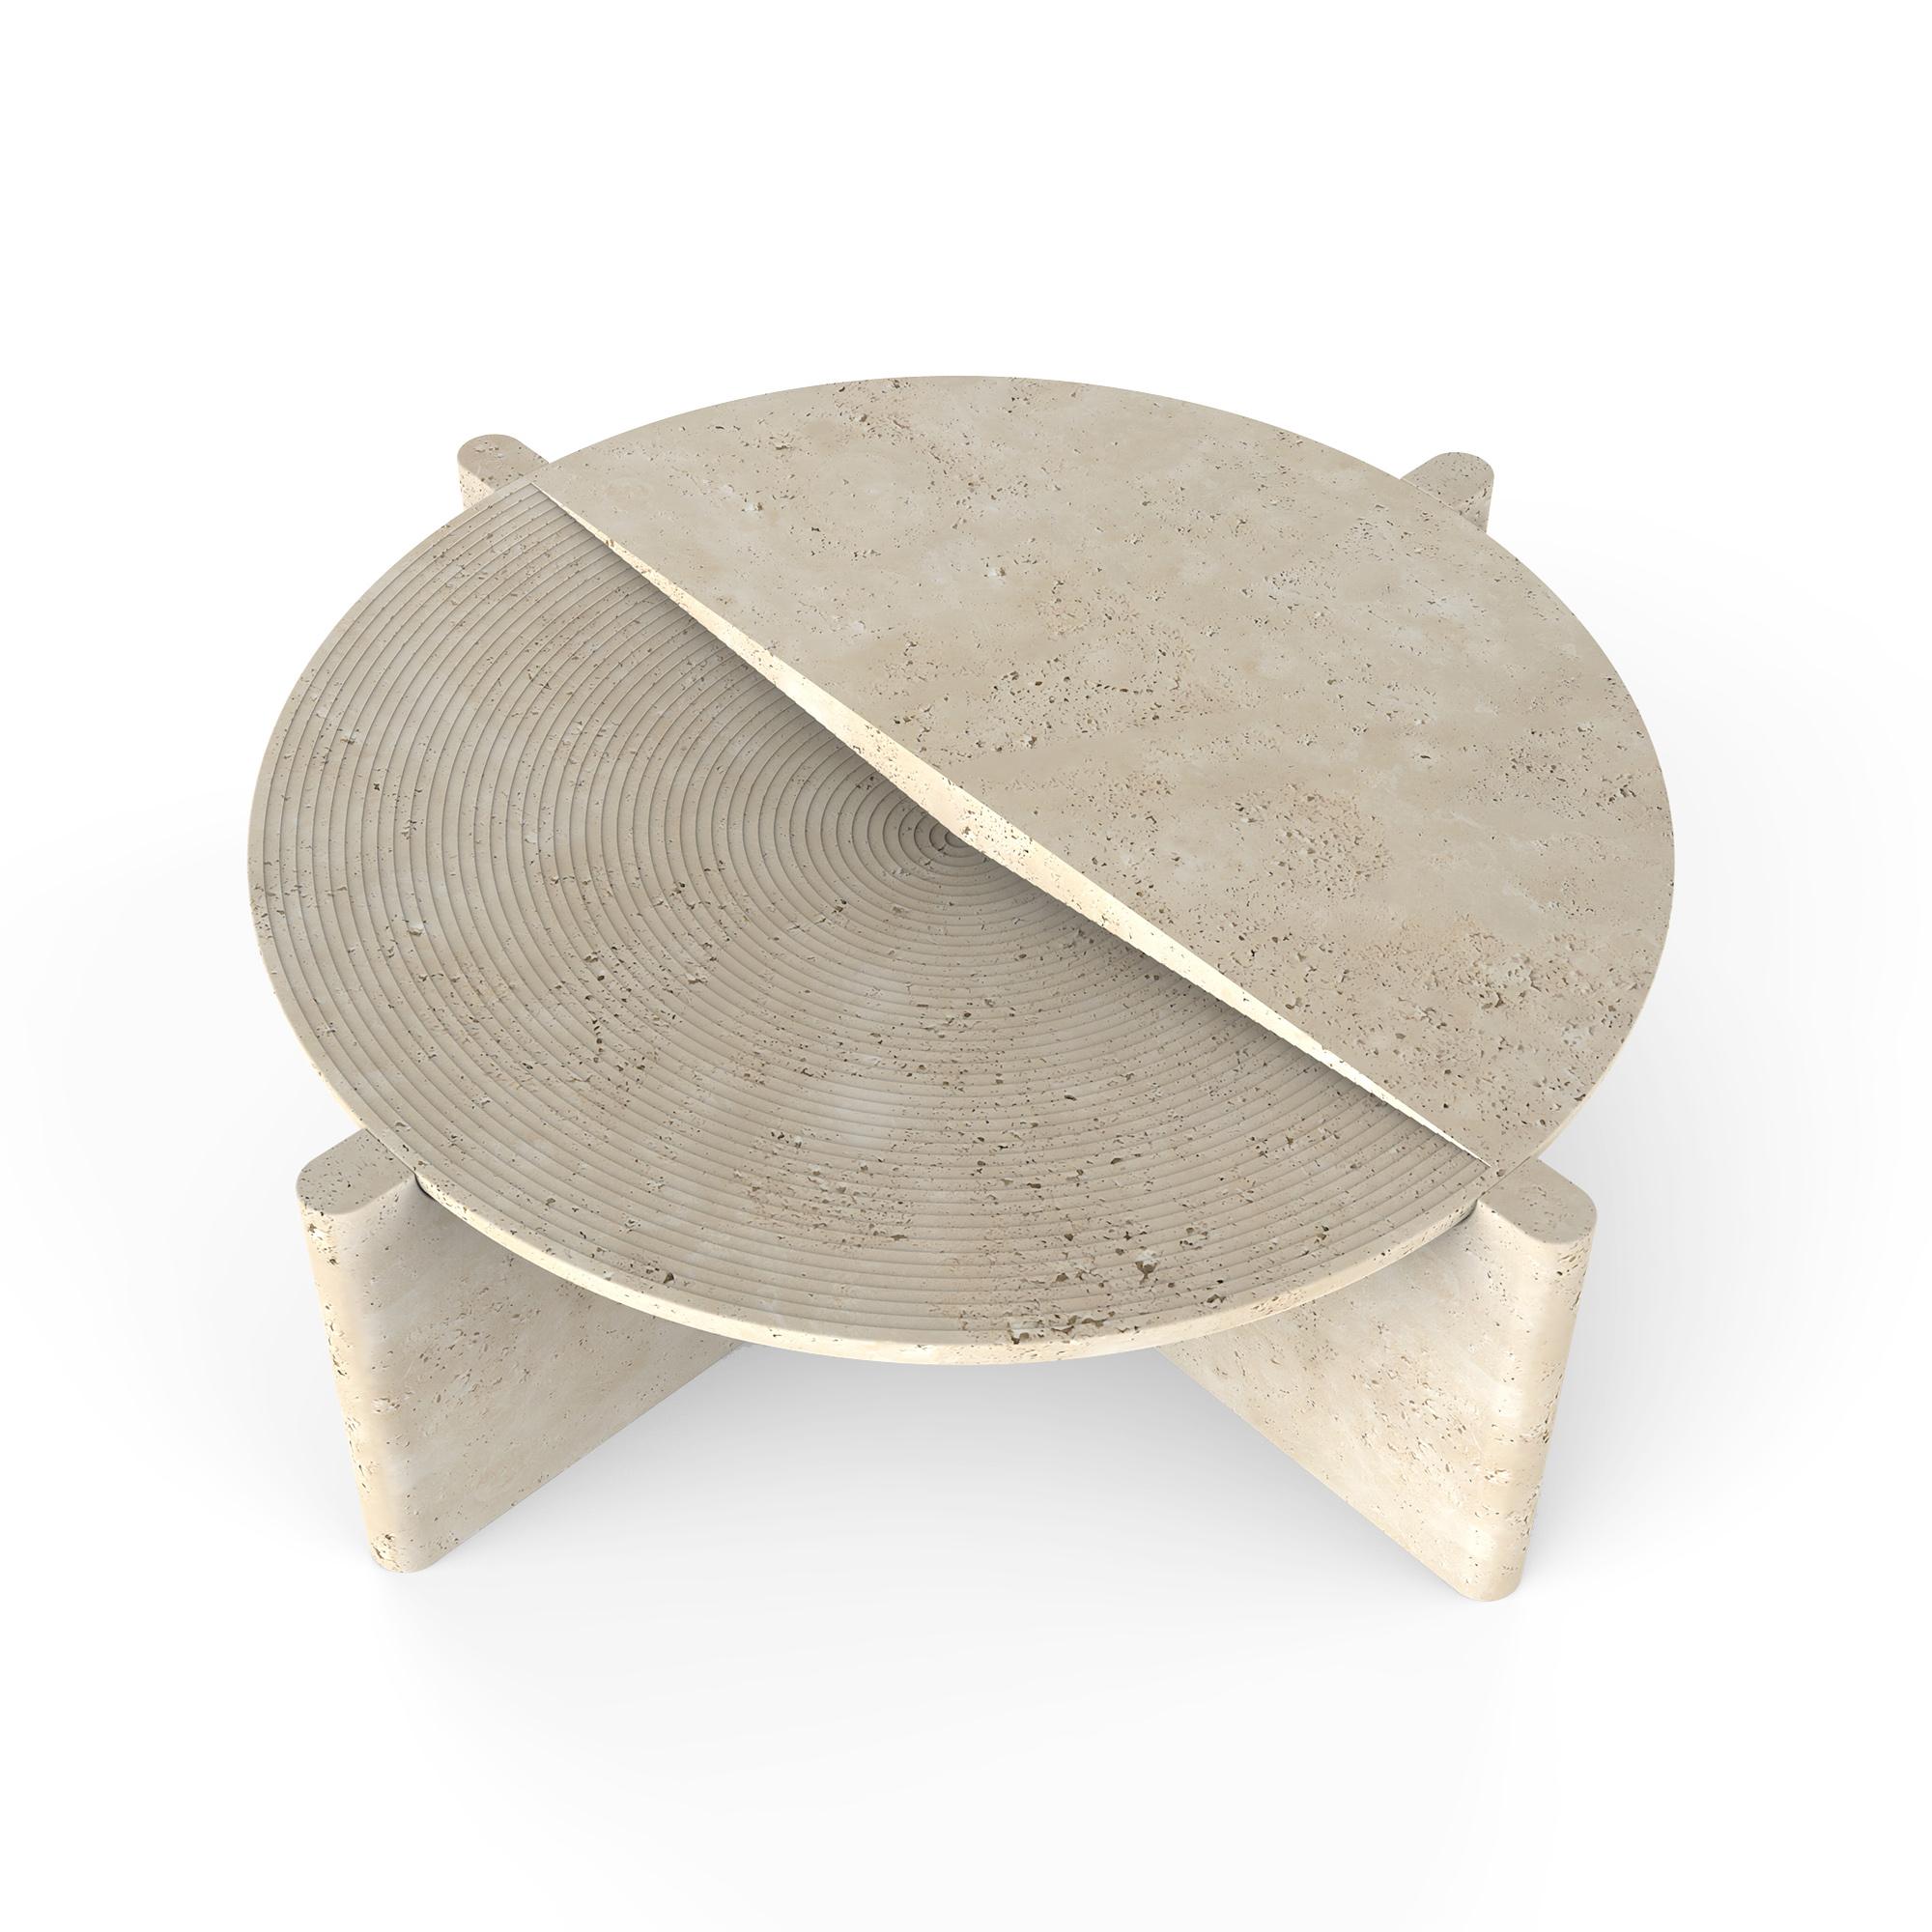 Hand-Crafted Arkhe No 1 Coffee Table Travertine, Modern Sculptural Round by Fulden Topaloglu For Sale